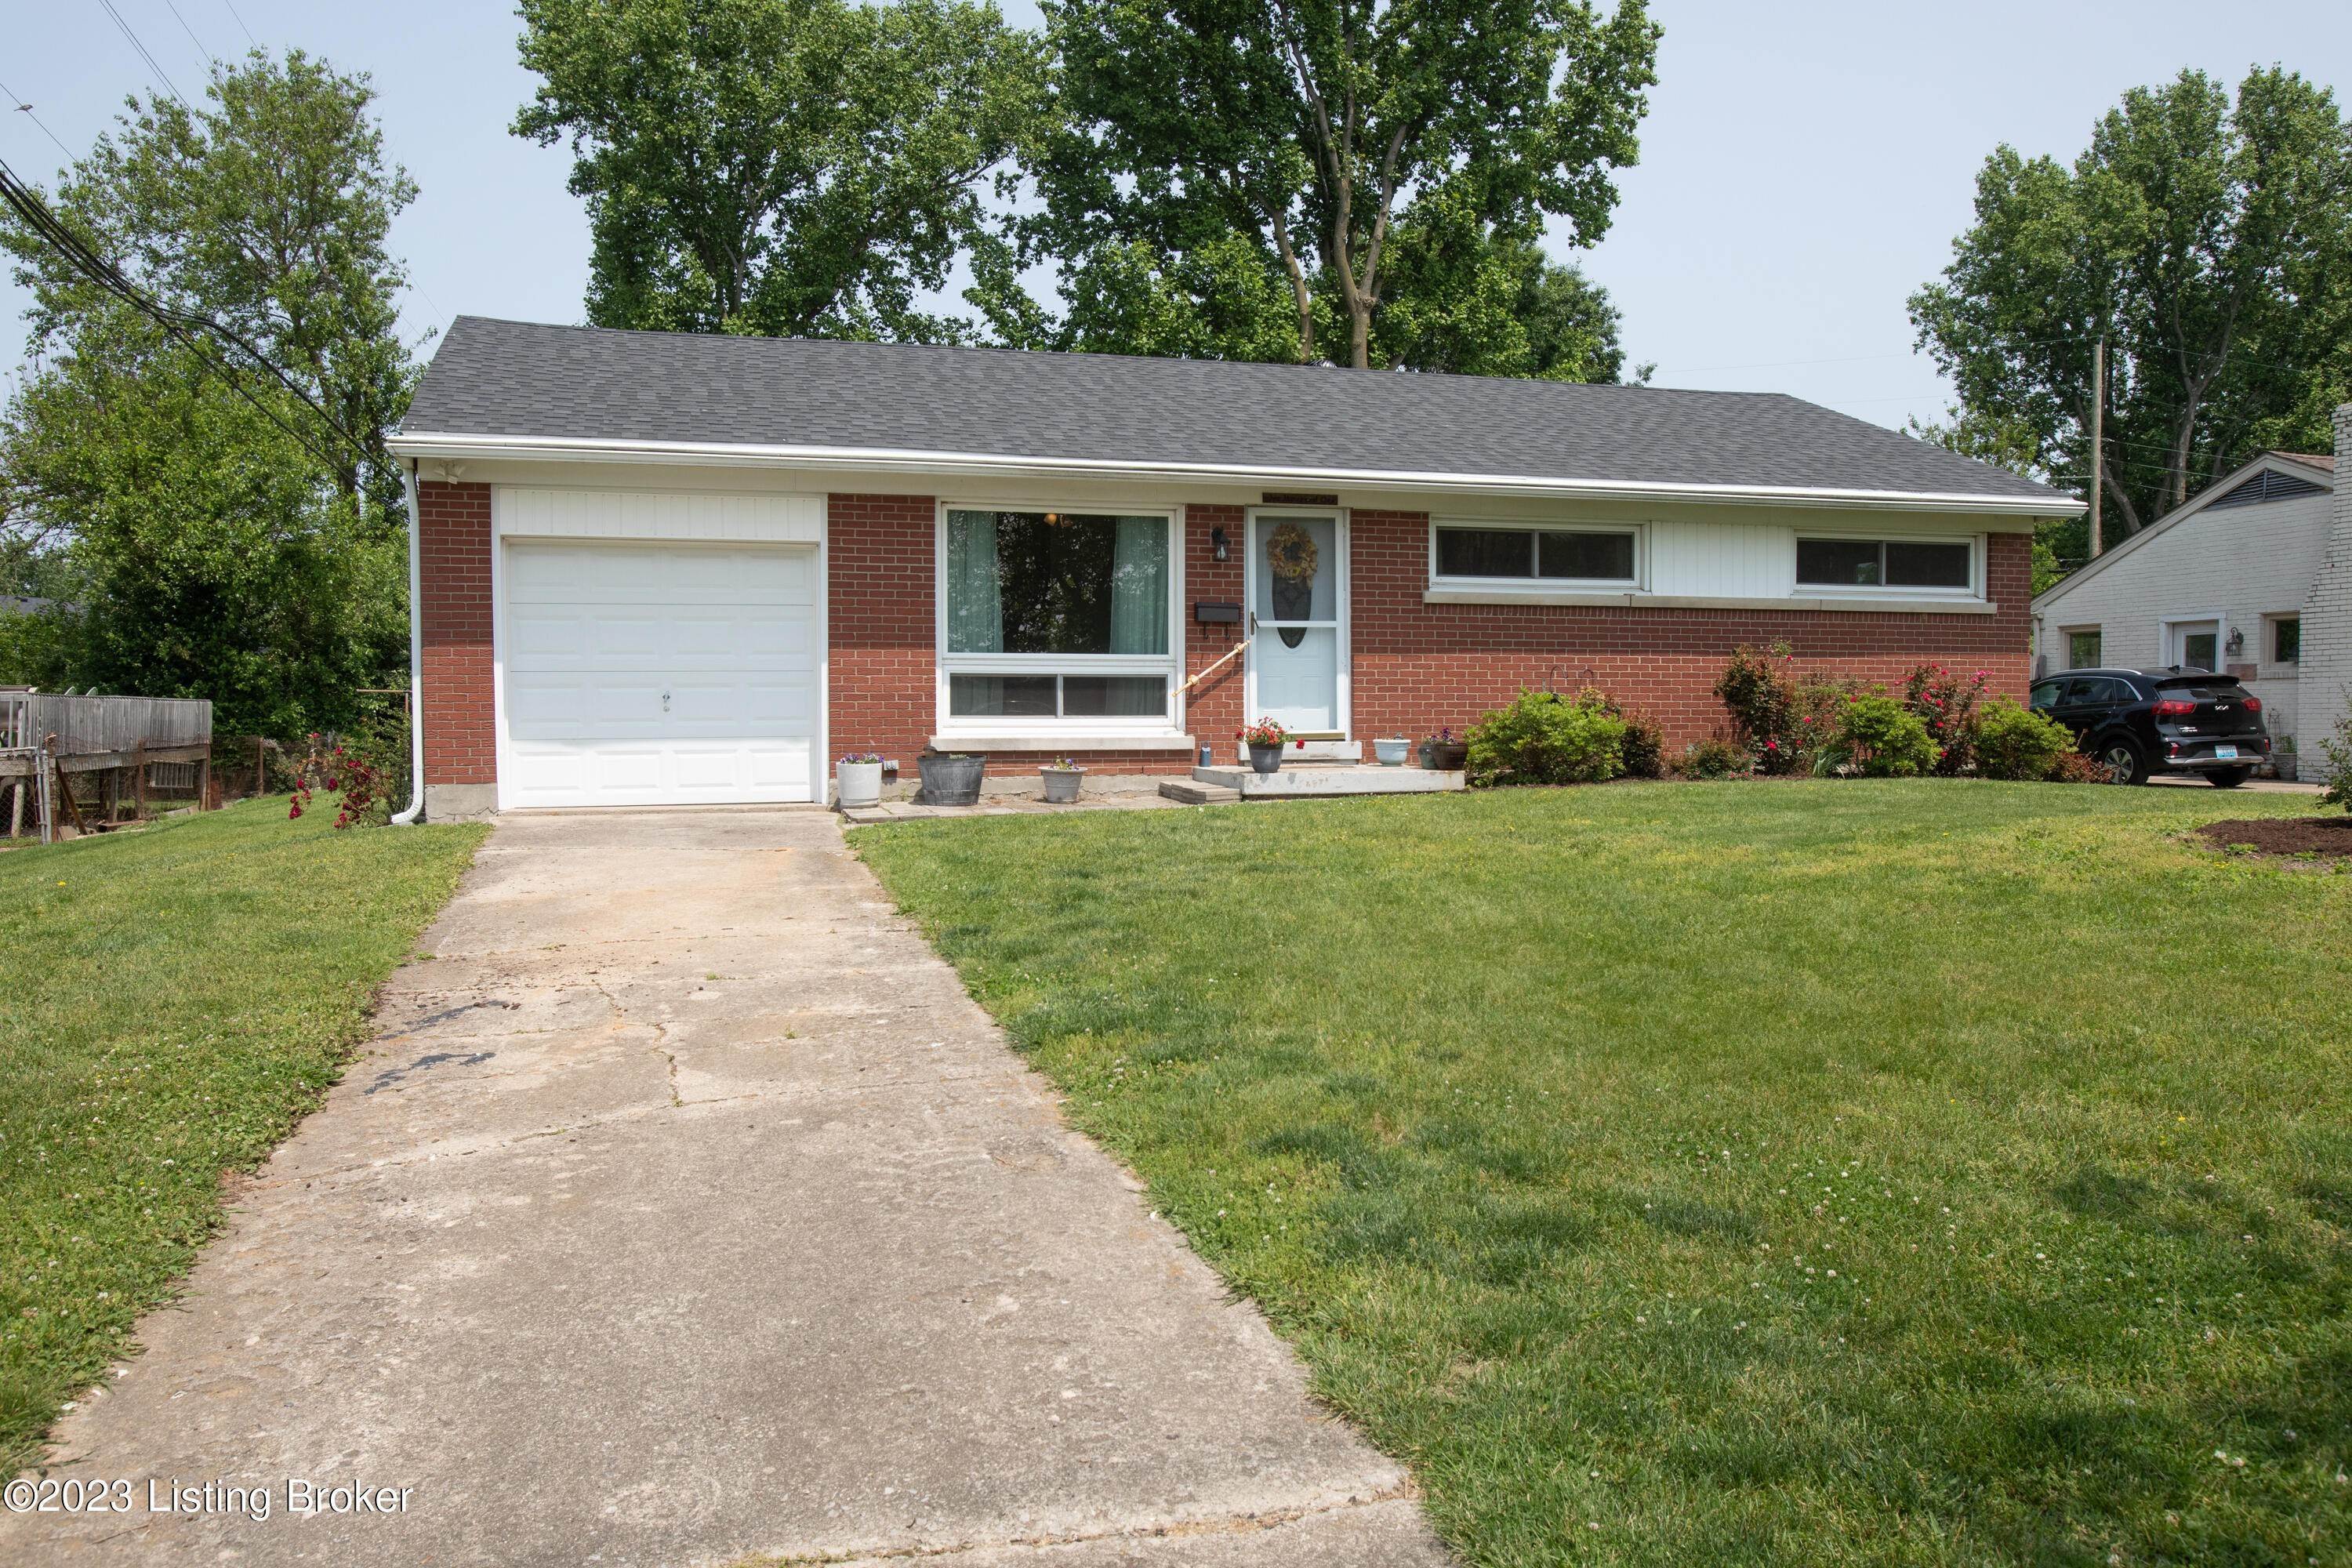 36. Single Family at Louisville, KY 40223